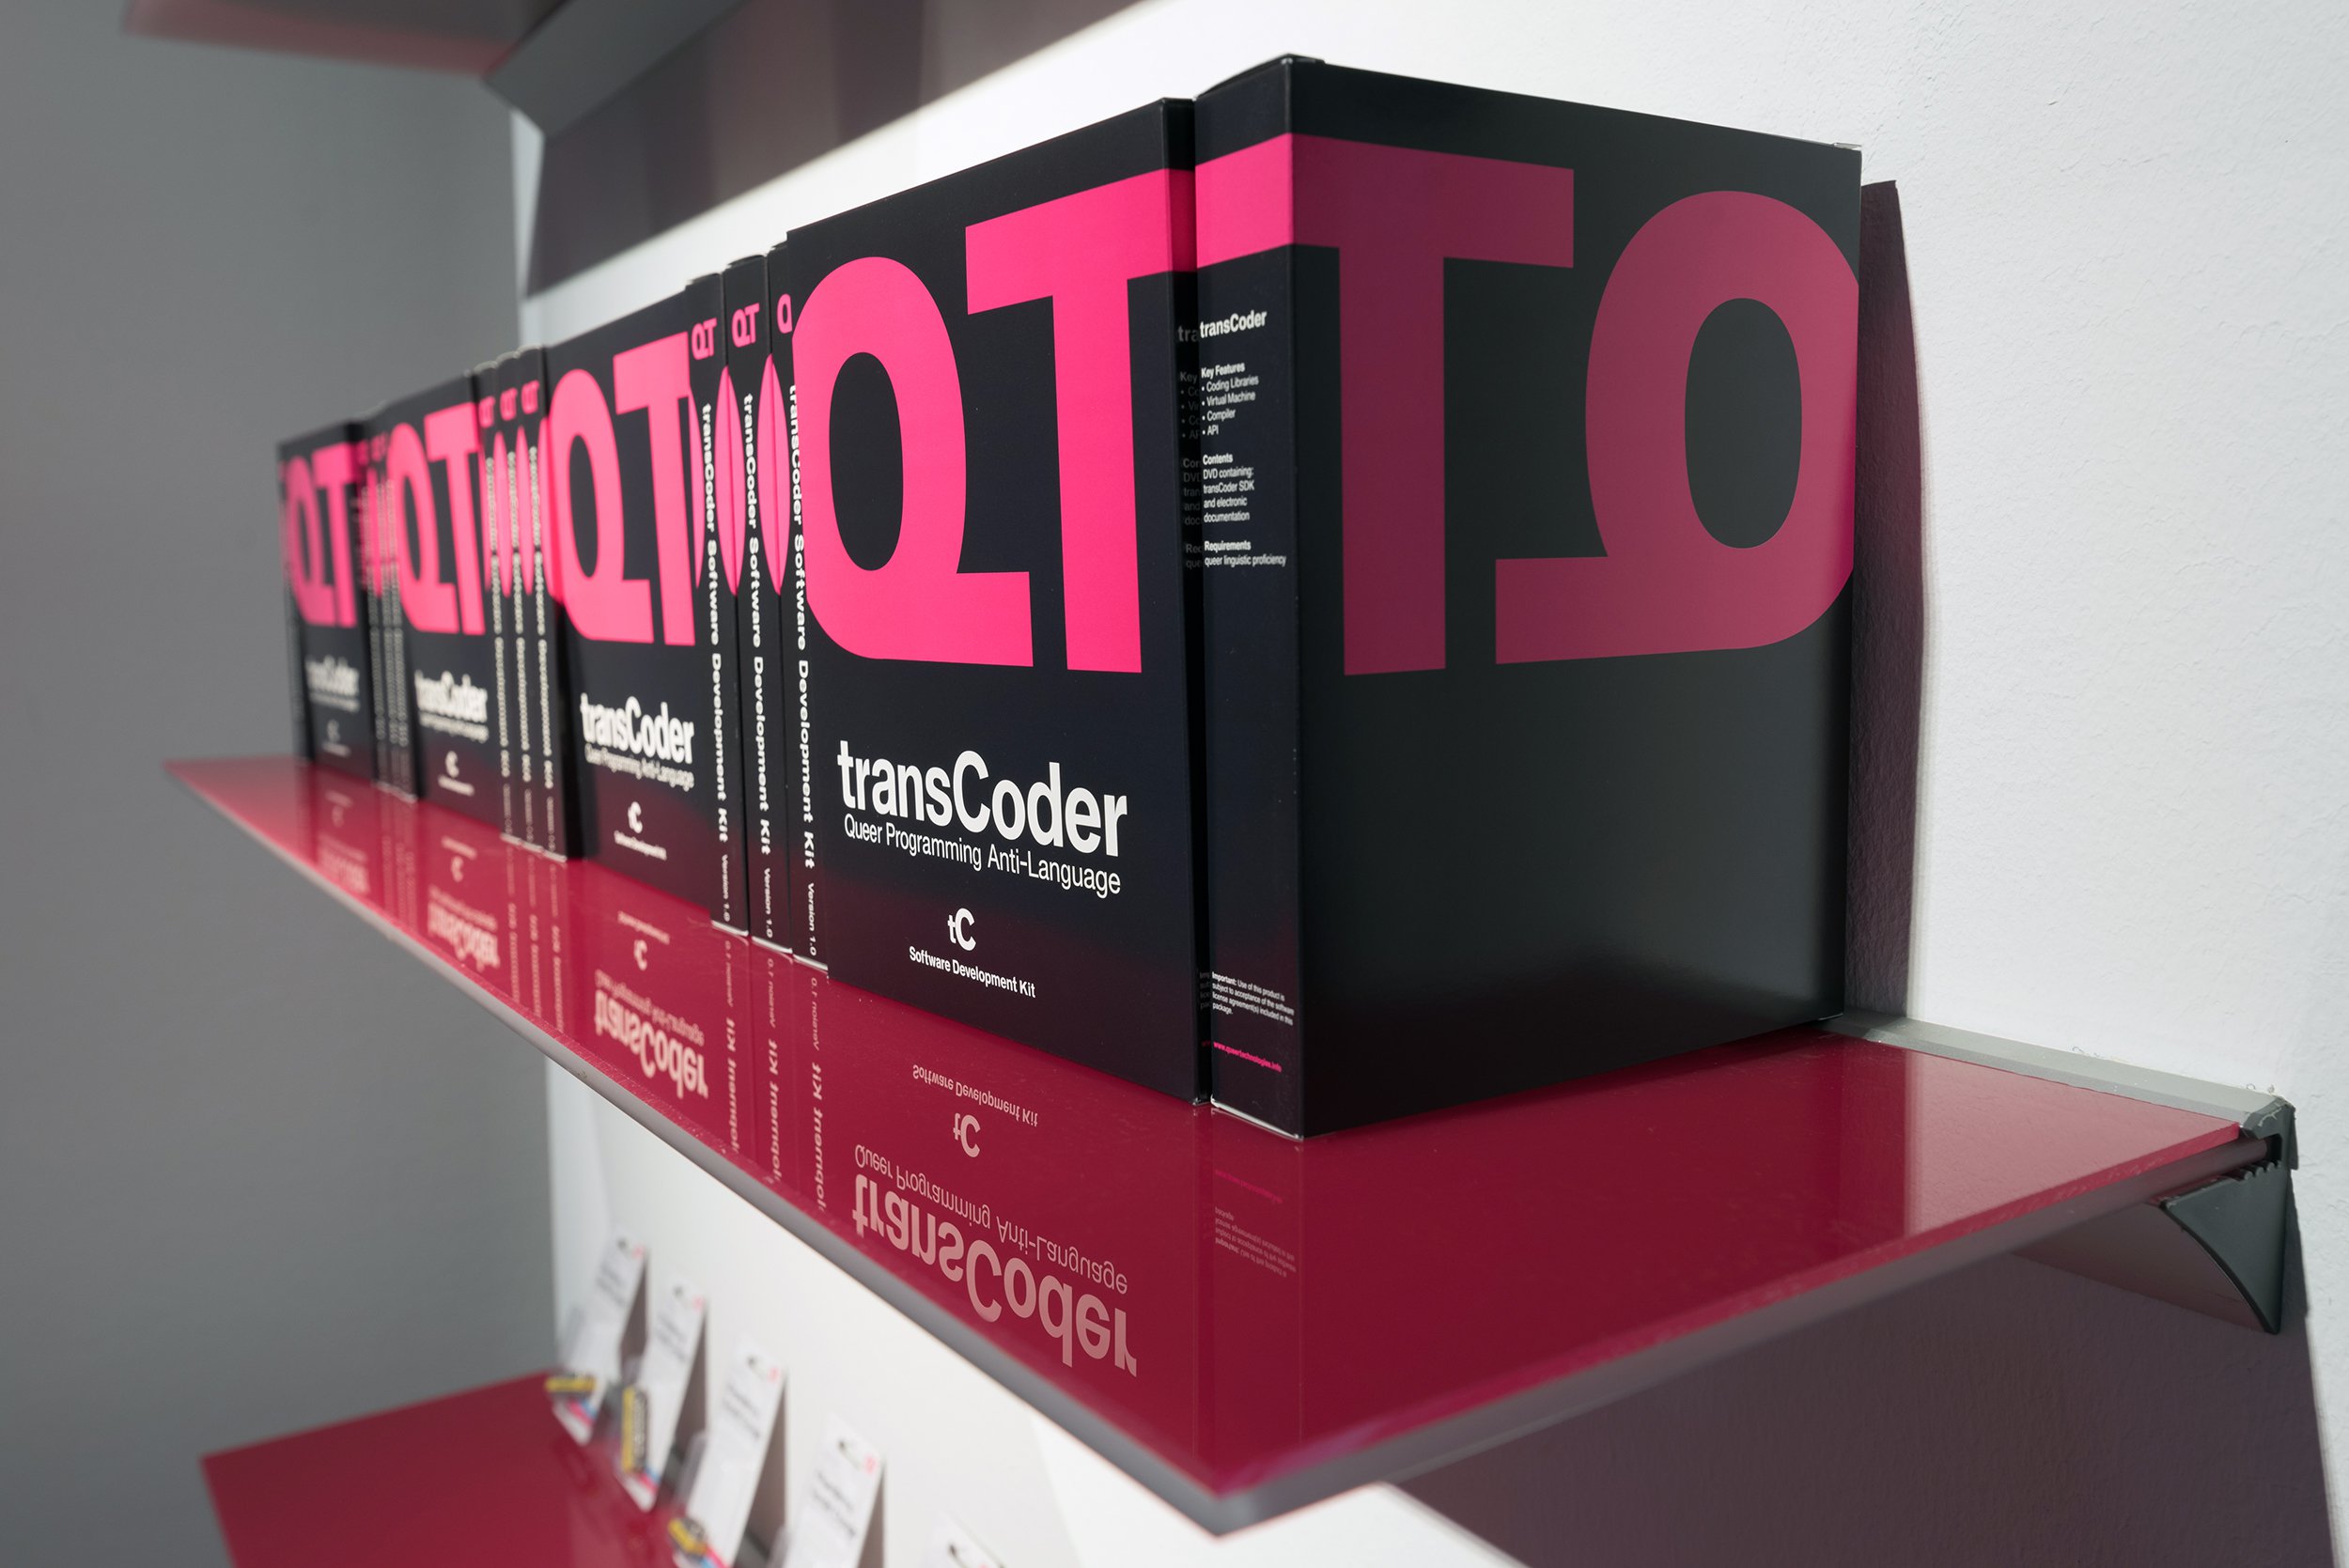 A red shelf with multiple boxes sitting next to each other. Each box is black with large pink QT printed on the top with a white “transCoder” below